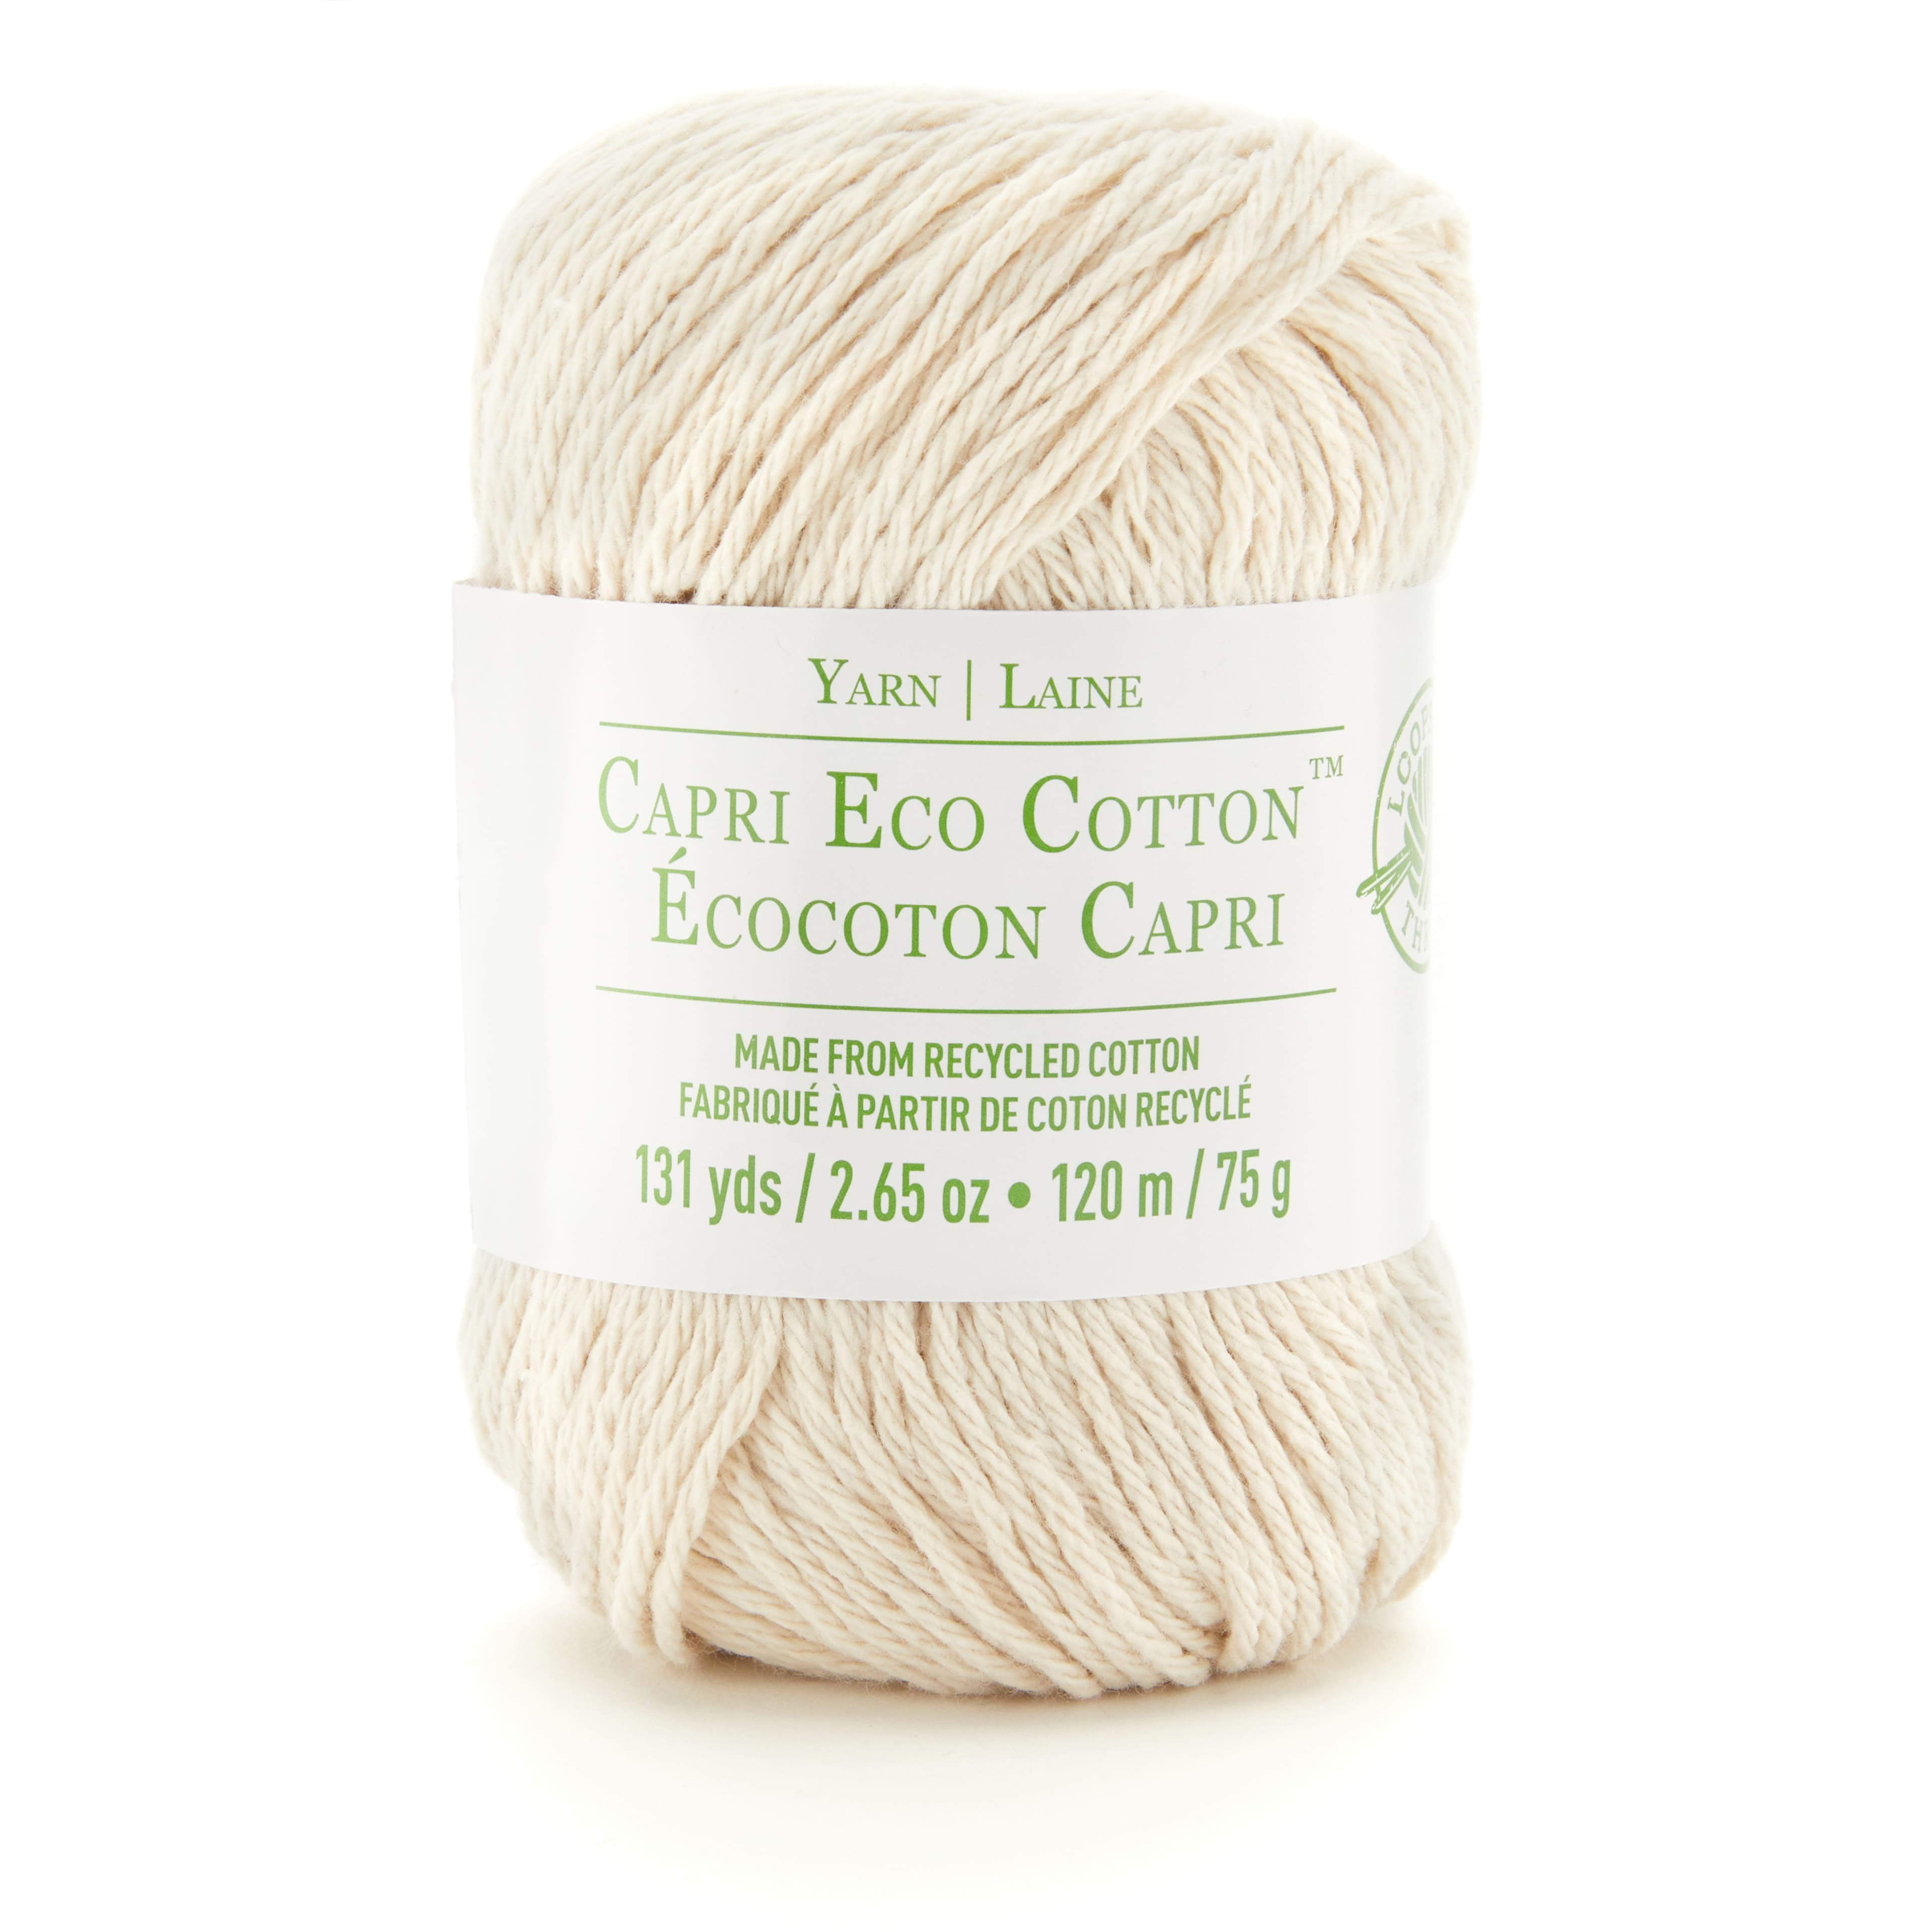 Cotton Batting by Loops & Threads™